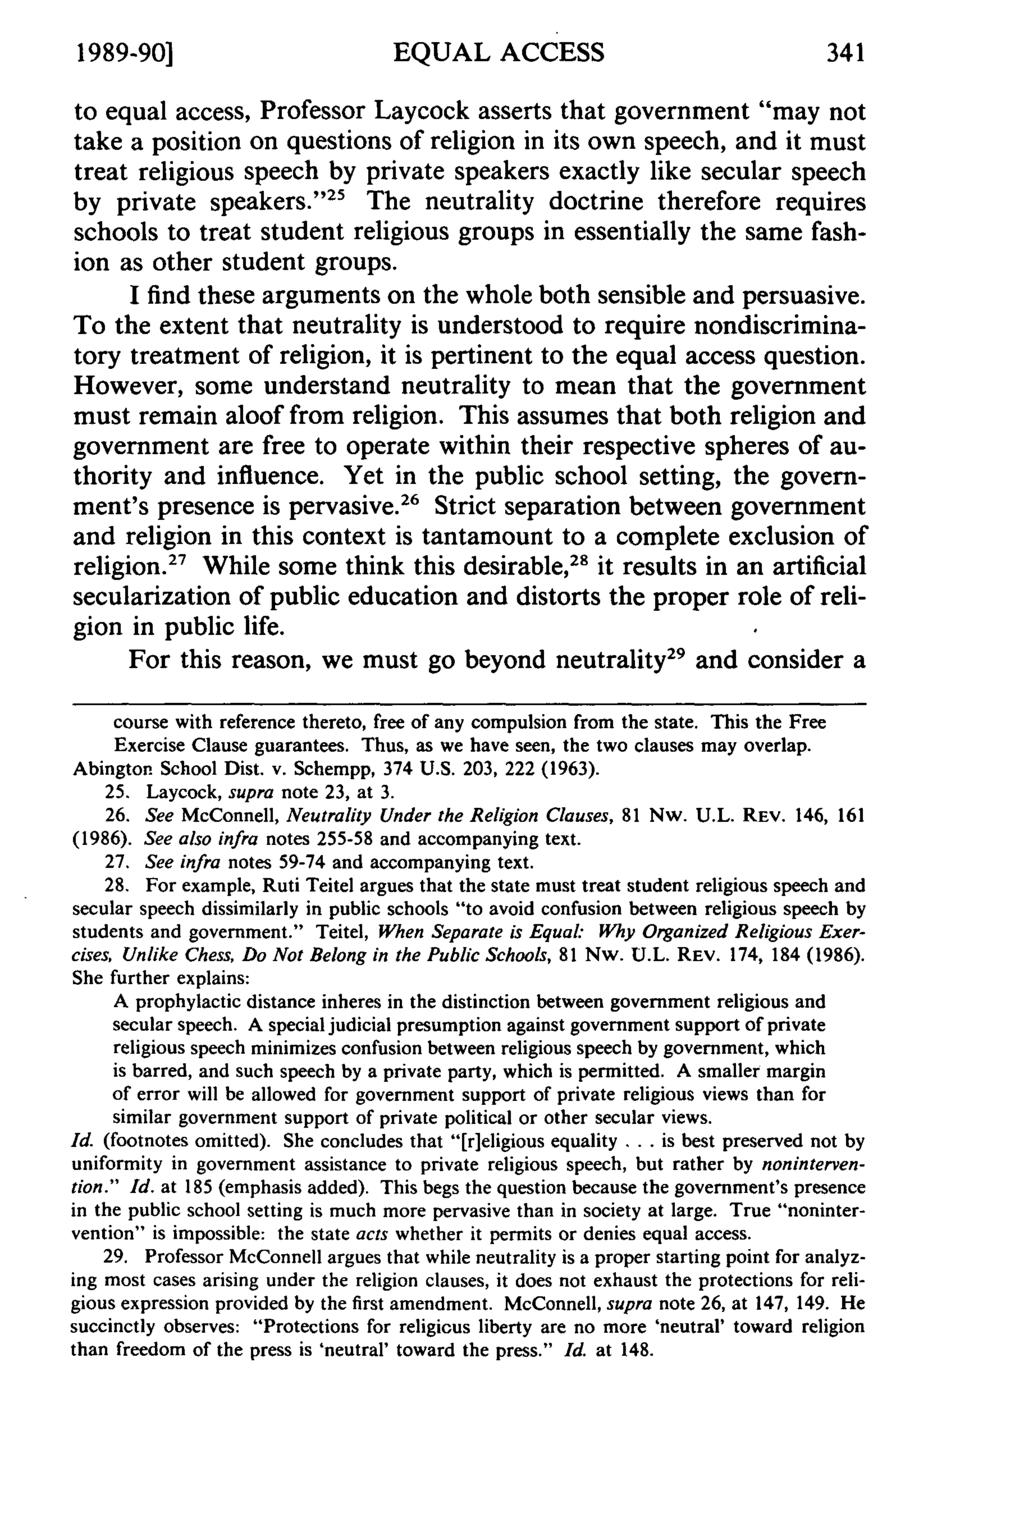 1989-90] EQUAL ACCESS 341 to equal access, Professor Laycock asserts that government "may not take a position on questions of religion in its own speech, and it must treat religious speech by private